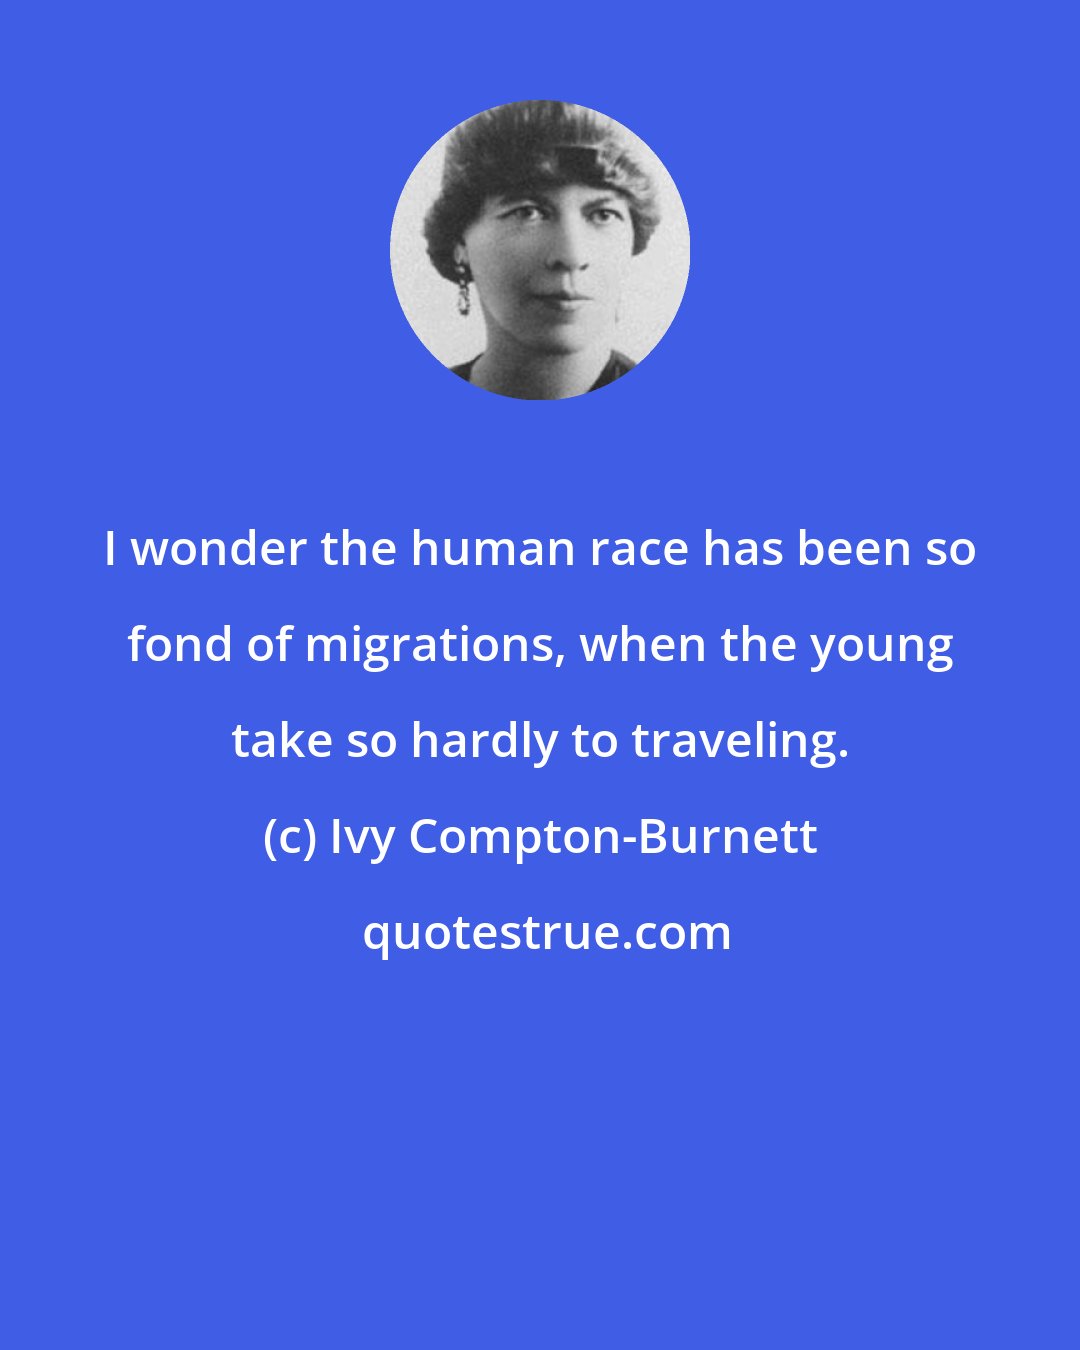 Ivy Compton-Burnett: I wonder the human race has been so fond of migrations, when the young take so hardly to traveling.